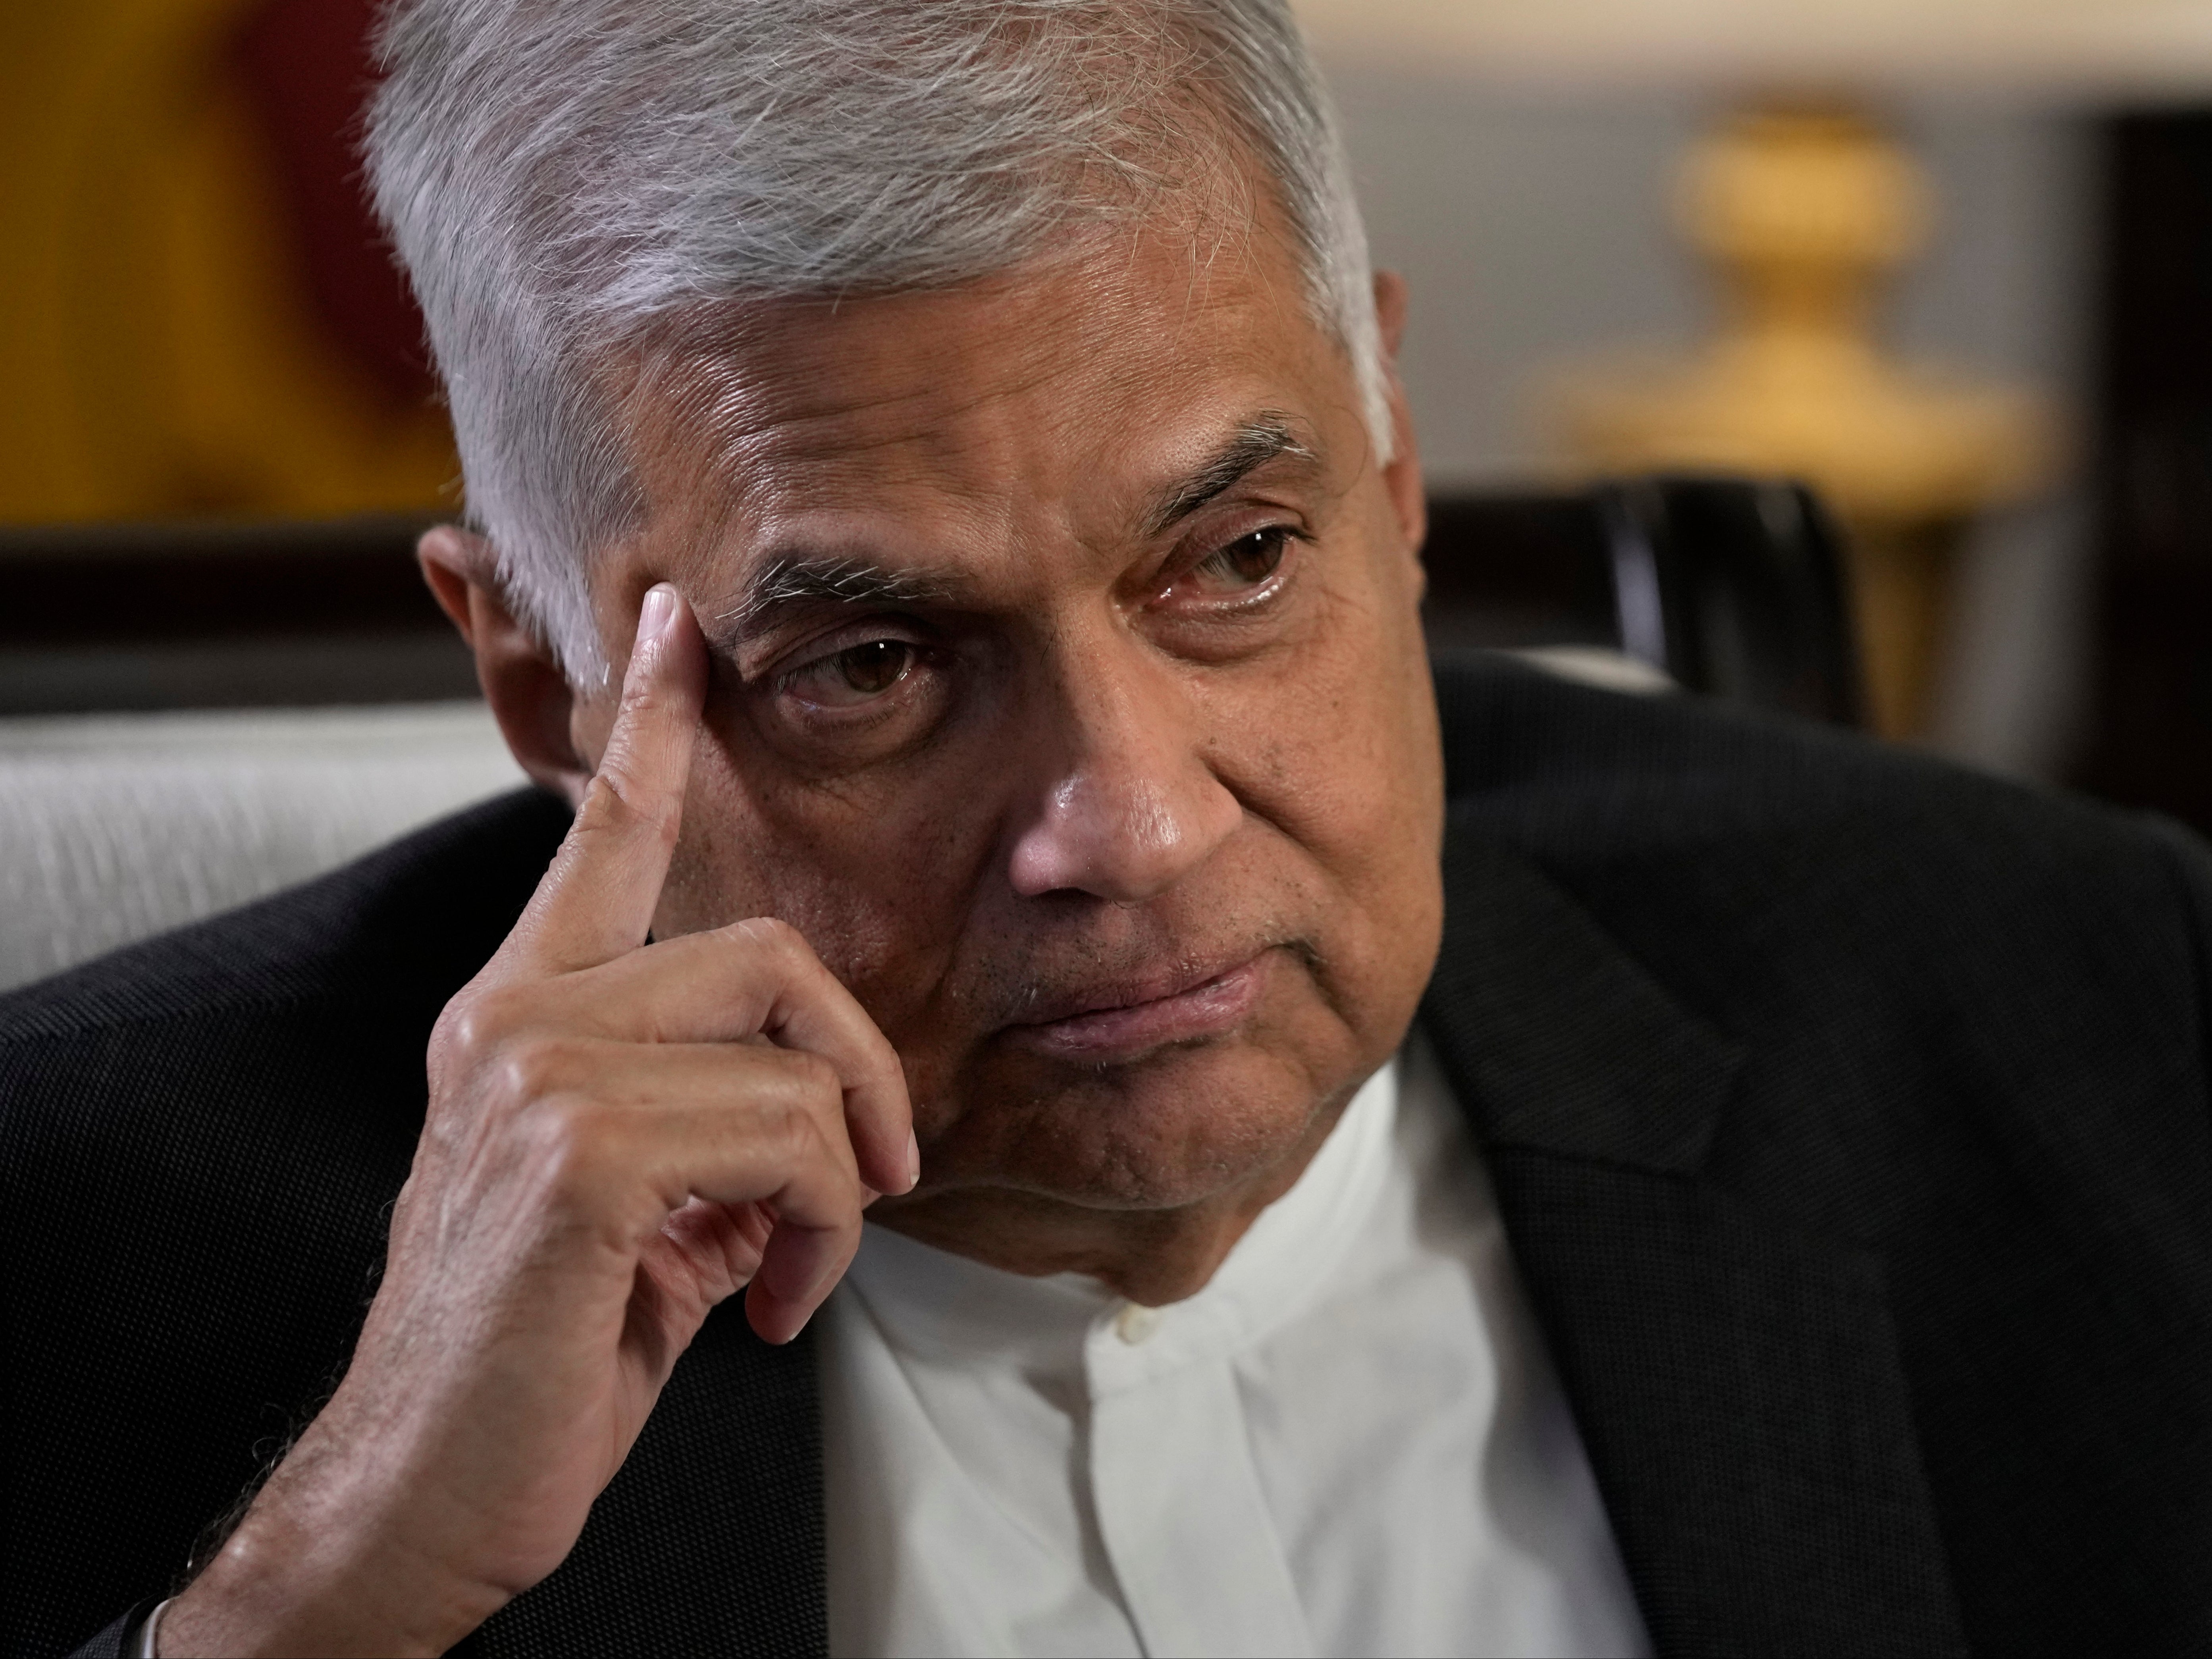 Ranil Wickremesinghe has agreed to step down as Sri Lanka’s prime minister